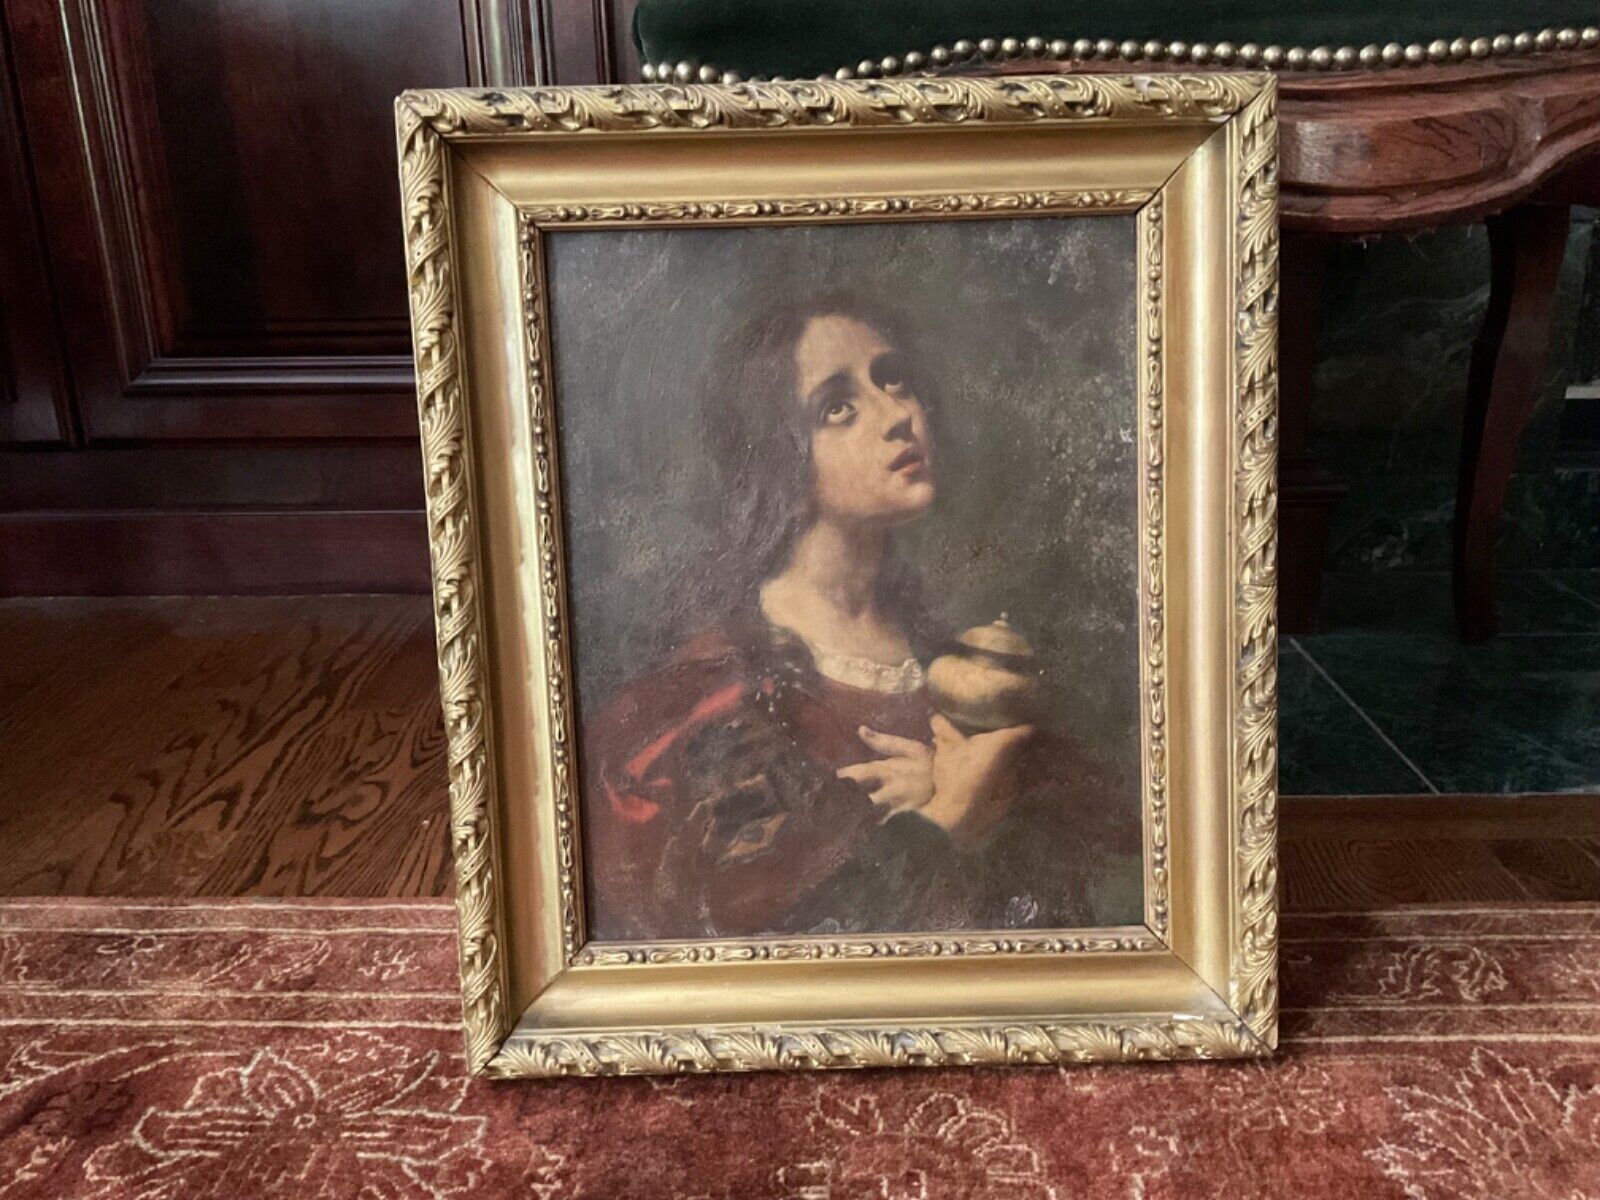 18th/19th Century Carlo Dolci Italian Religious Oil Painting Mary Magdalene Icon